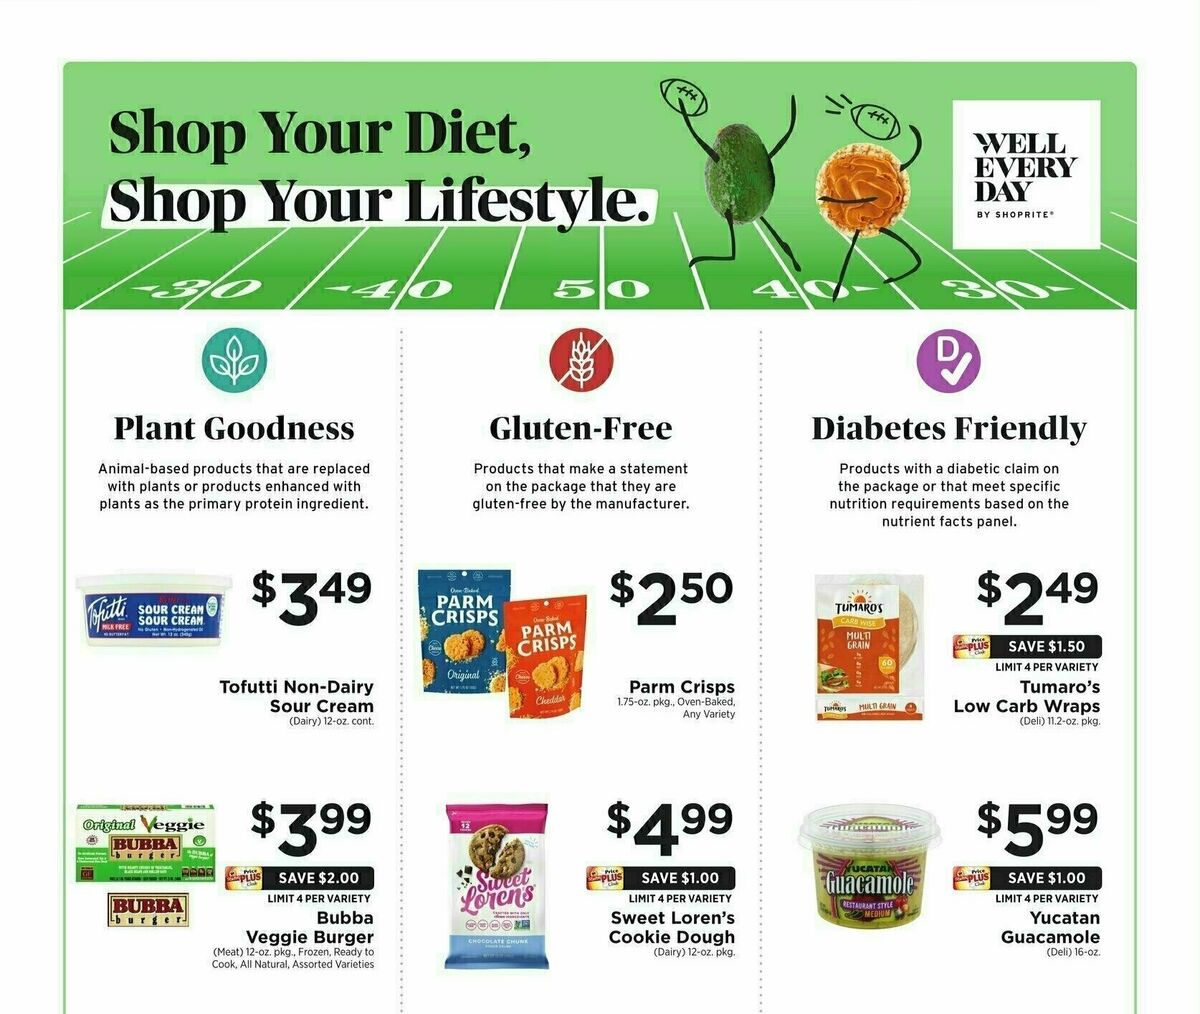 ShopRite Well Everyday Big Game Weekly Ad from February 2